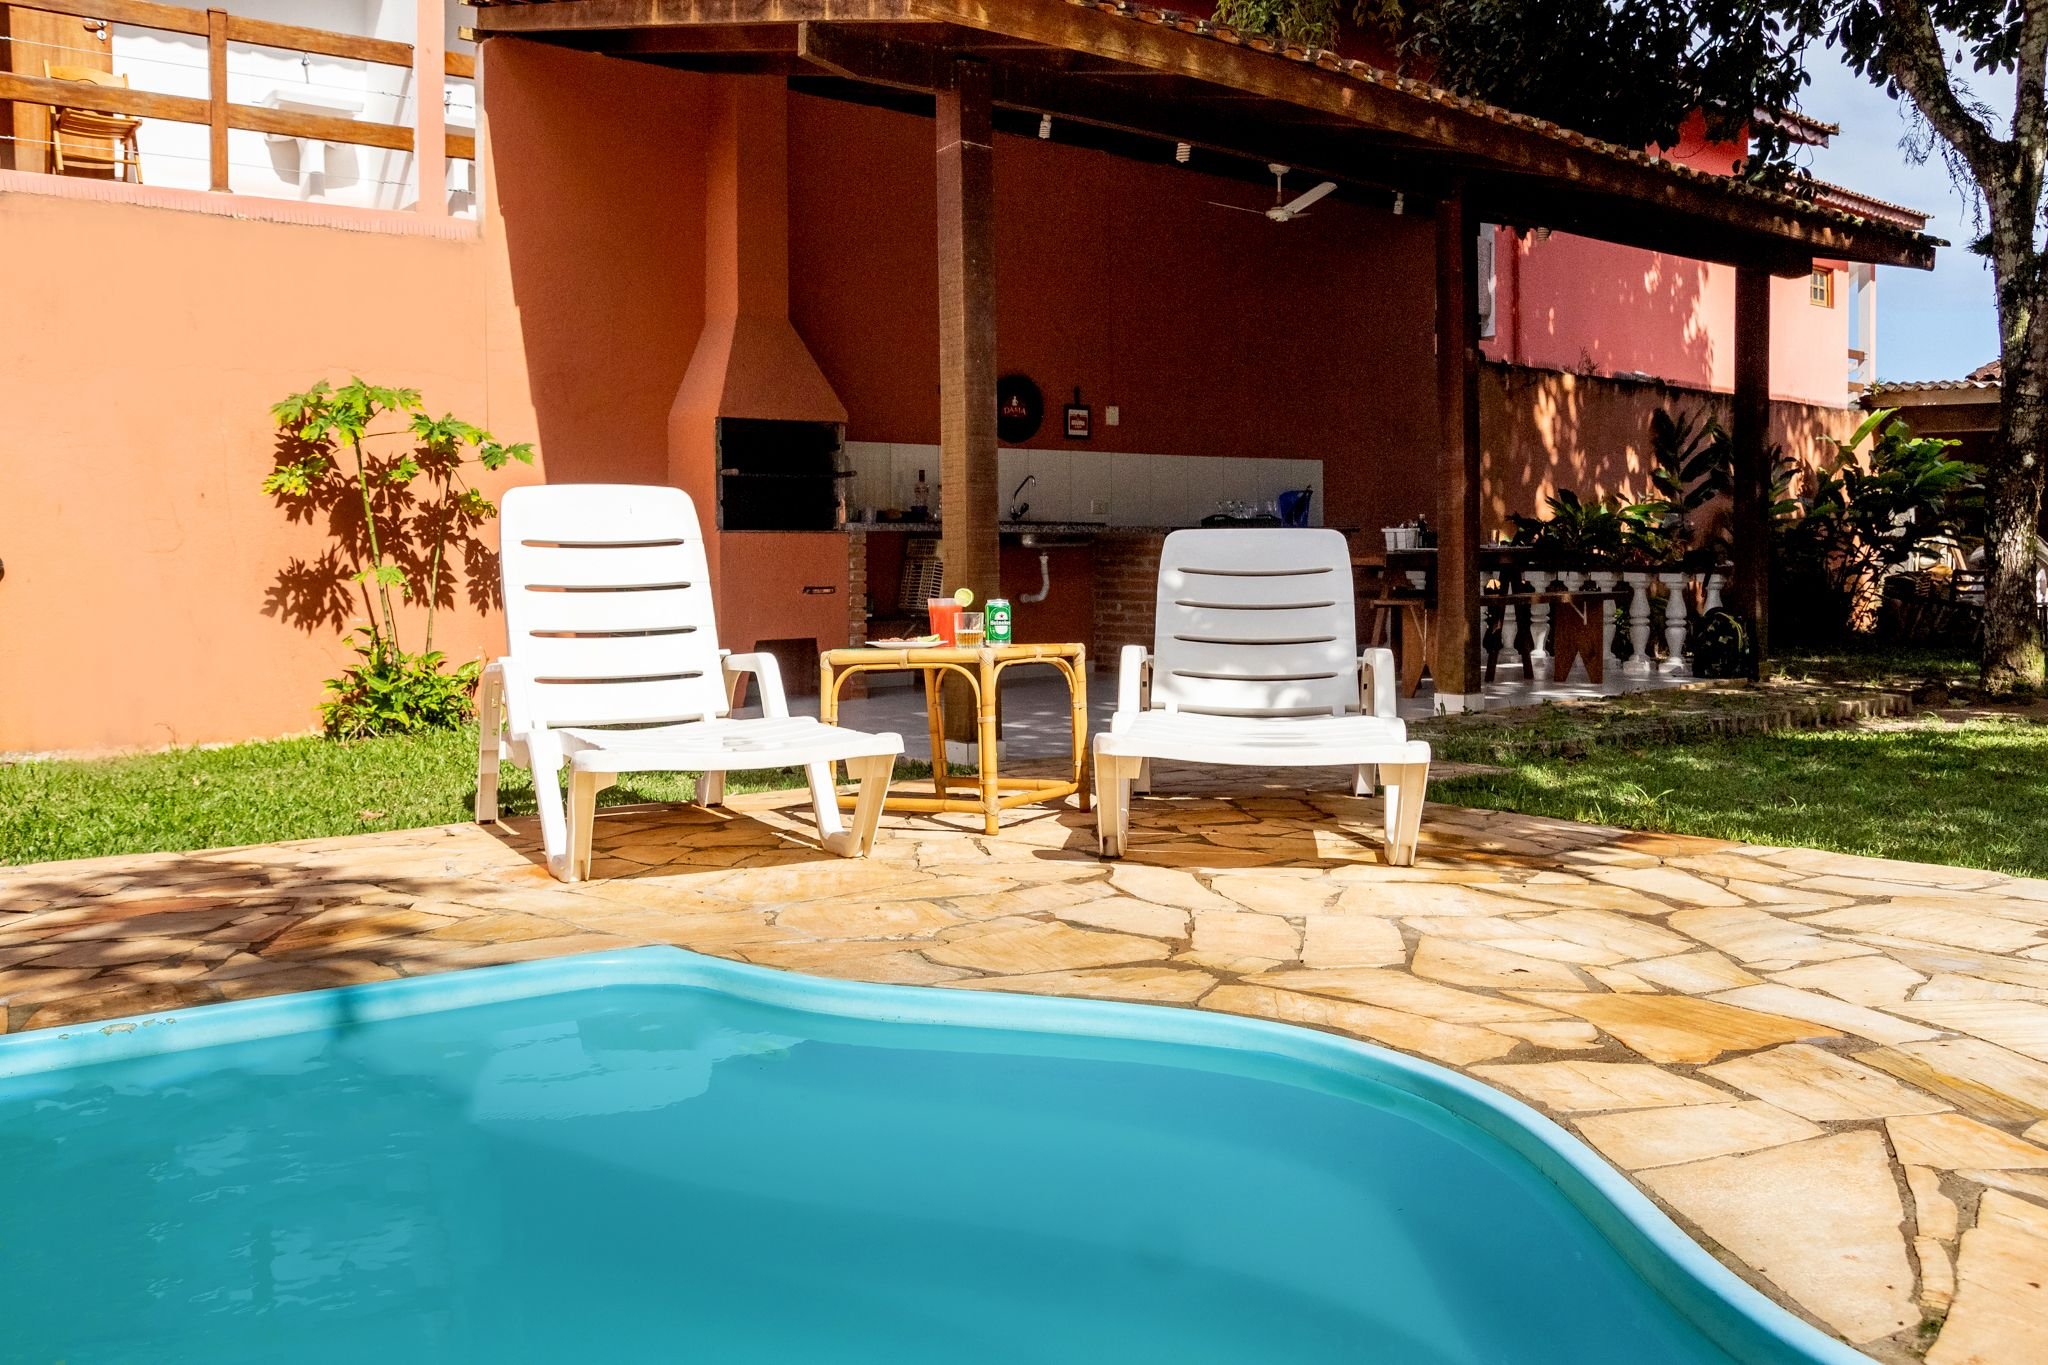 Property Image 2 - Itaberaba Master Ville - Large residence with pool, barbecue and close to the beach in Boicucanga